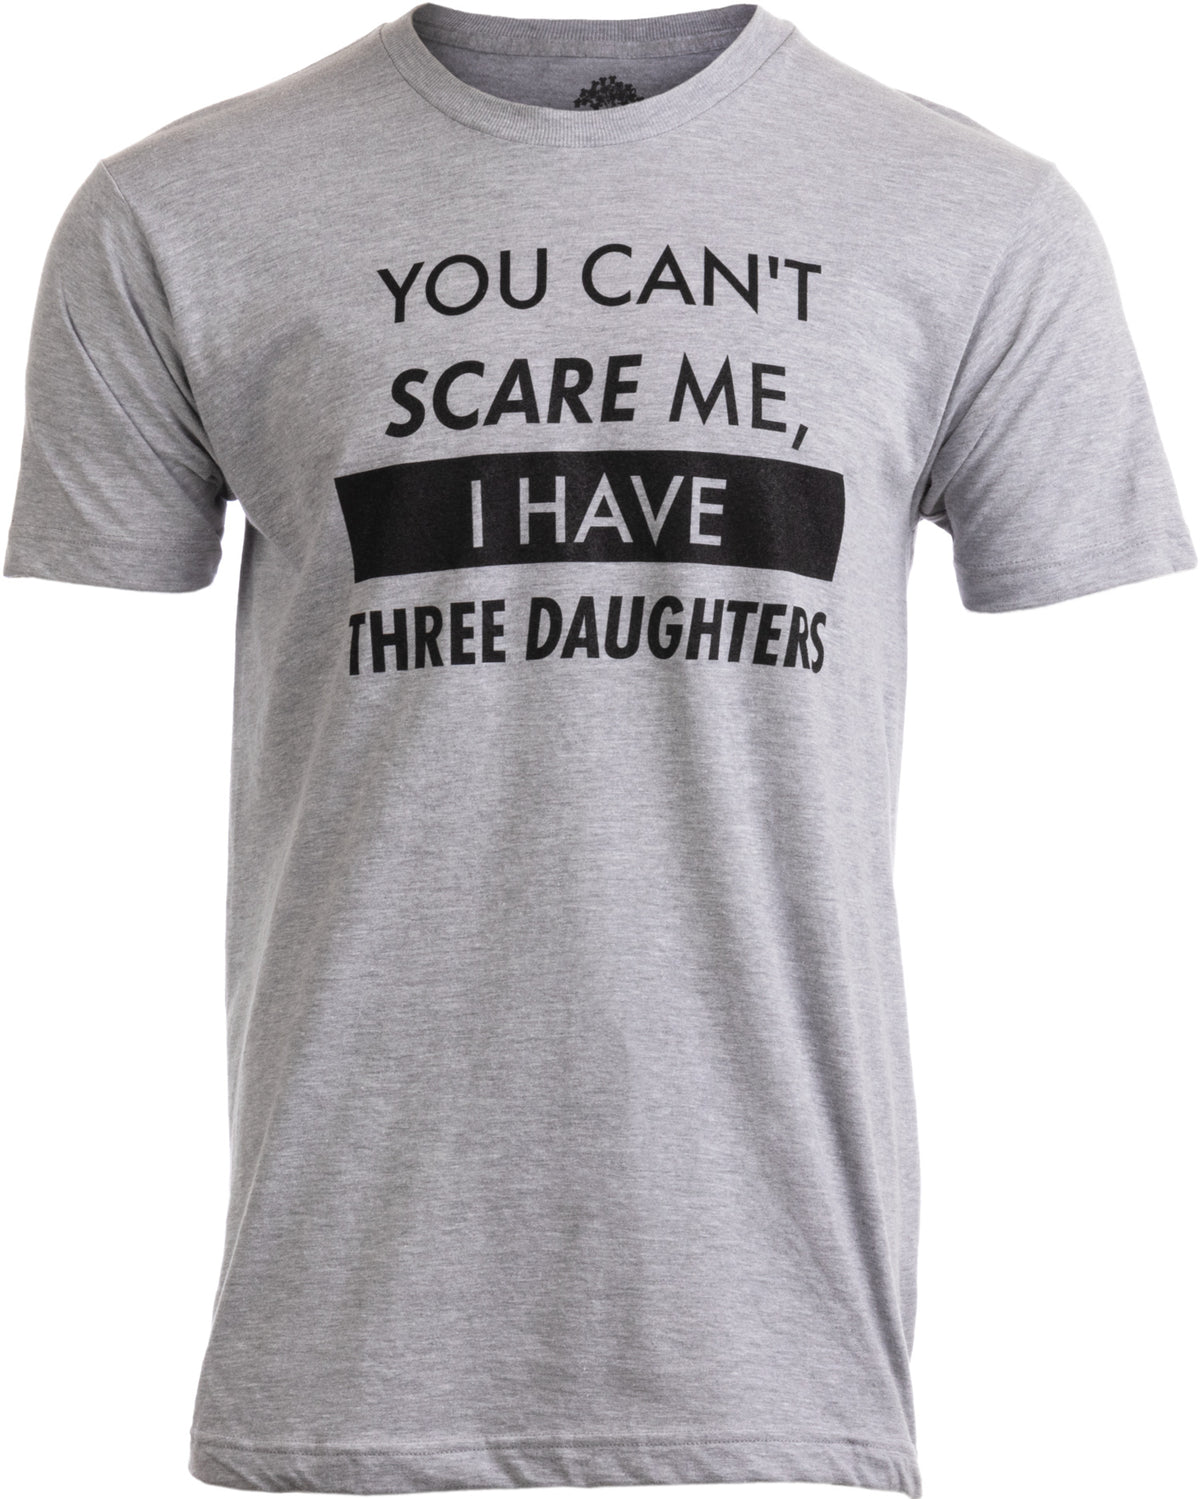 "You Can't Scare Me, I have Three Daughters" - Funny Dad Daddy Joke T-shirt